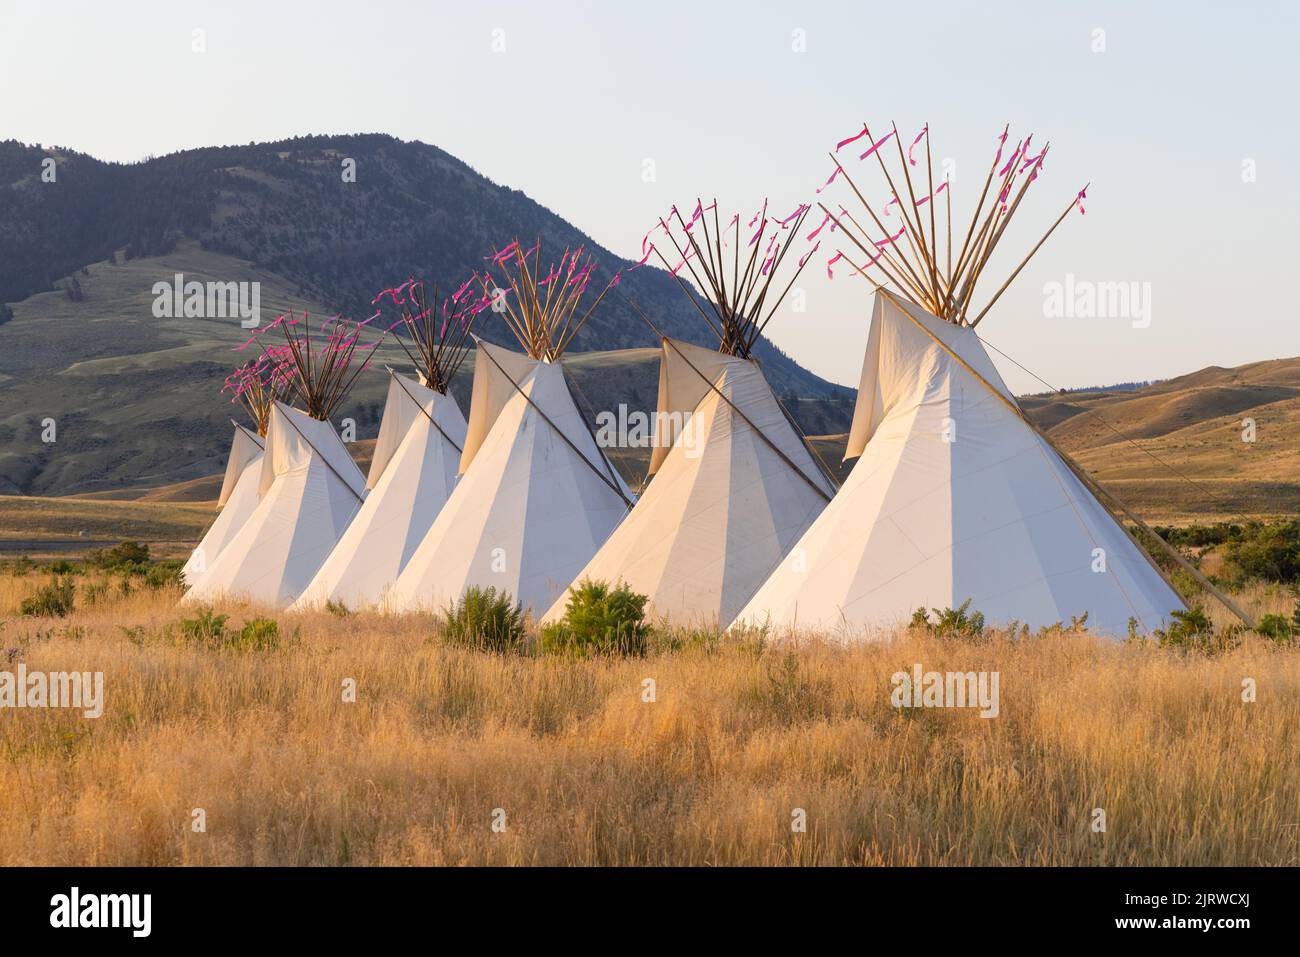 Madison Junction, United States of America. 18 August, 2022. Native American teepee lodges at the All Nations Teepee Village at the North Entrance to mark the 150th anniversary of Yellowstone National Park August 17, 2022 in Madison Junction, Montana. The project by Mountain Time Arts features 13 teepee lodges that signify a new era of Indigenous inclusion and representation in Yellowstone National Park. Credit: Jacob W. Frank/NPS/Alamy Live News Stock Photo